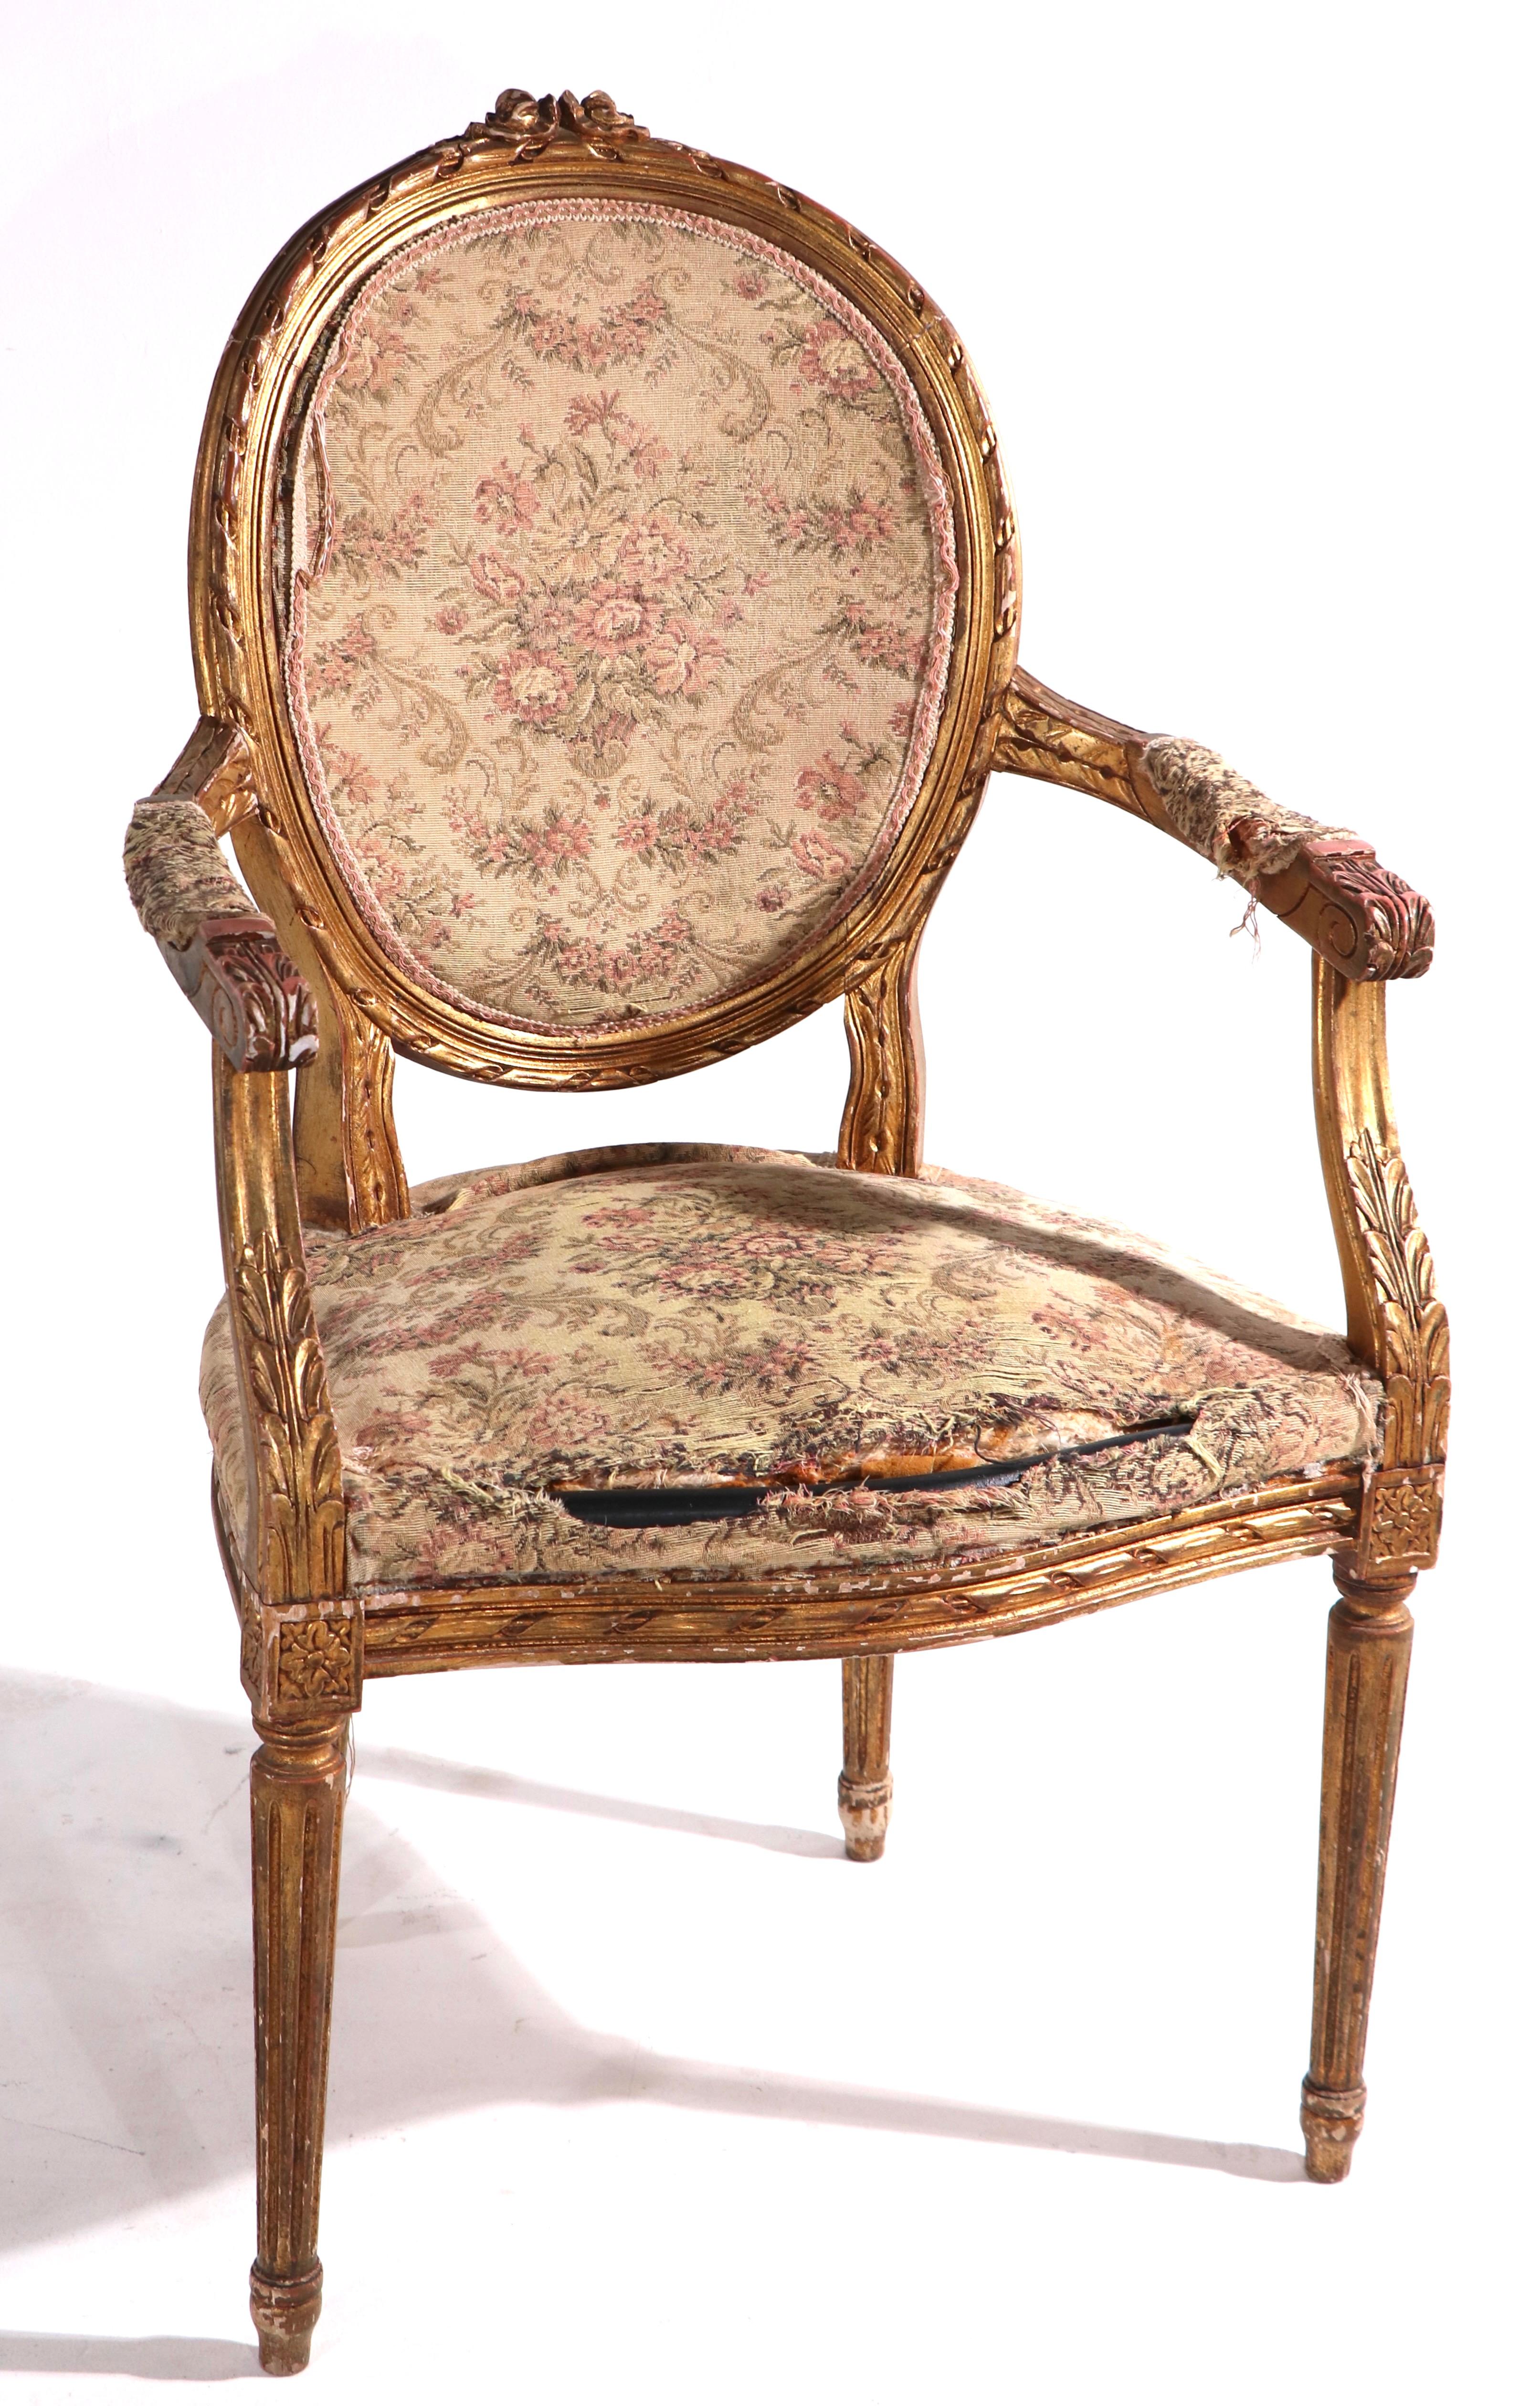 We believe this is a Late 19th, or Early 20th C gilt wood salon chair in as found condition. This elegantly carved wood arm chair is structurally sound and sturdy, it shows wear to the gilt finish, and will need to be reupholstered. Louis XVI style,